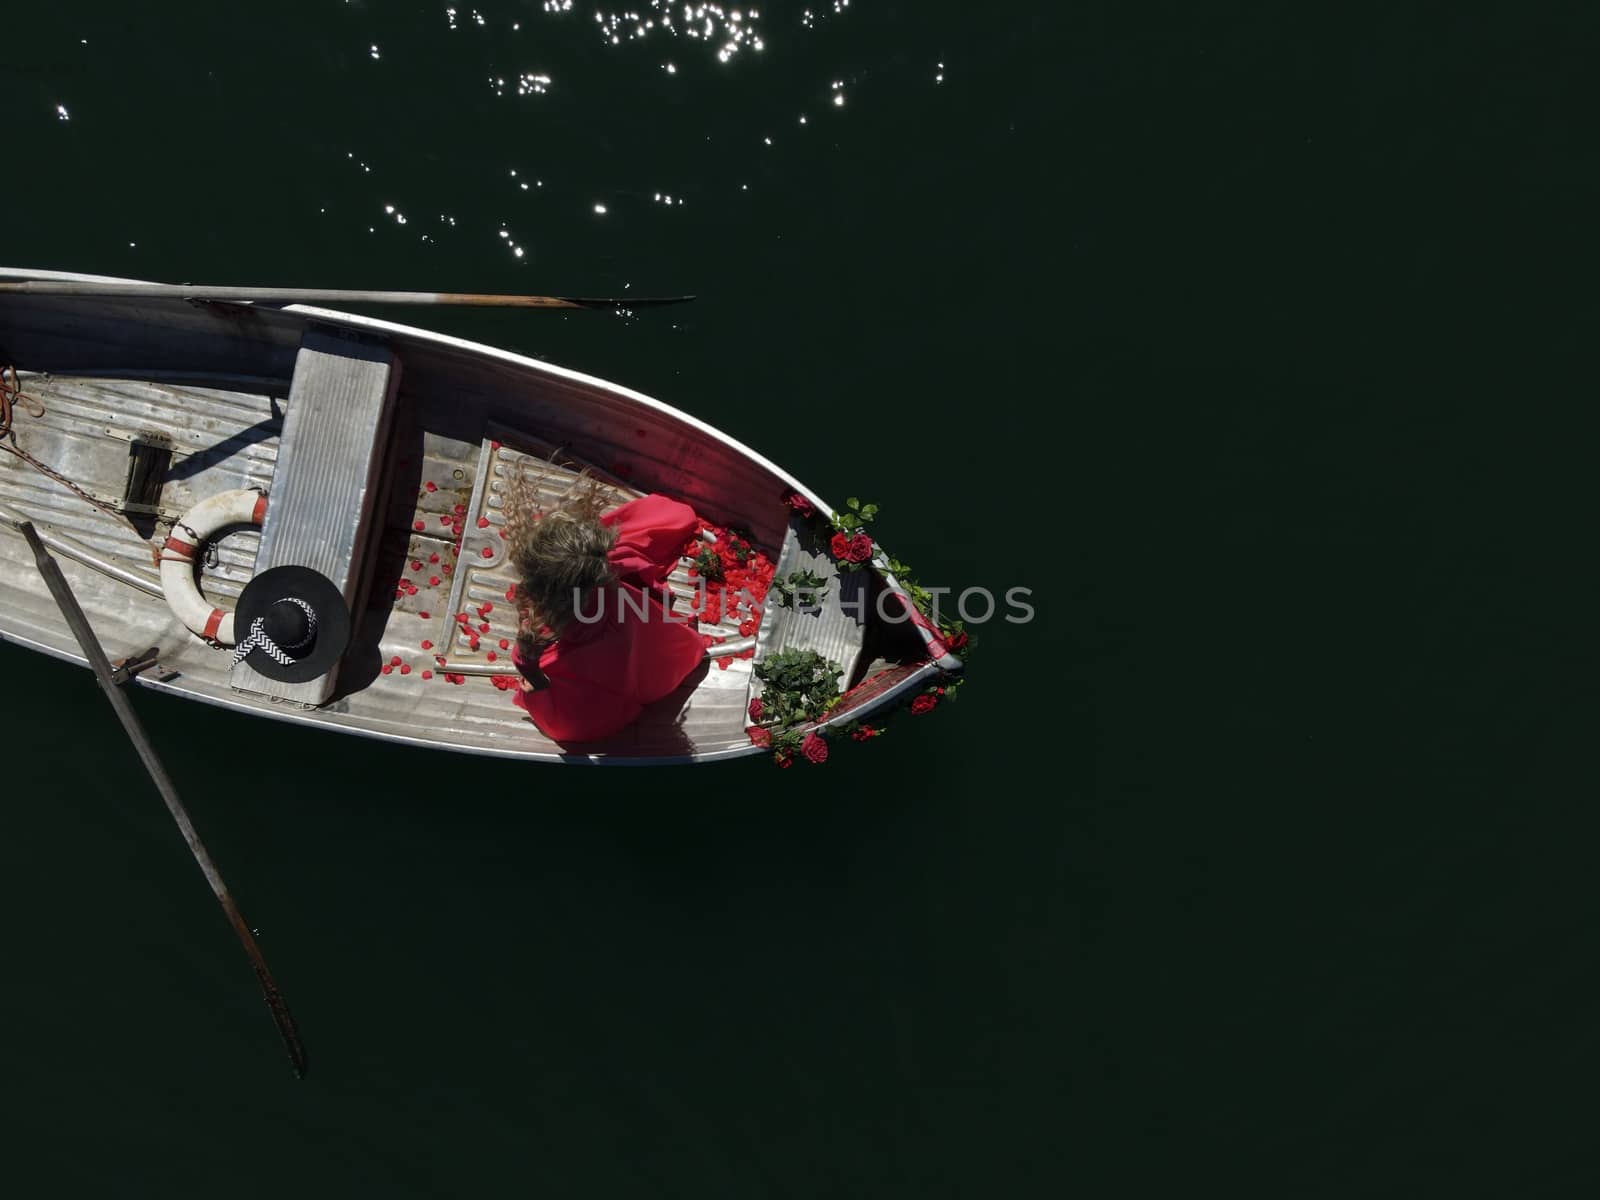 Romantic woman with long blond hair on boat with roses and flowe by PeterHofstetter